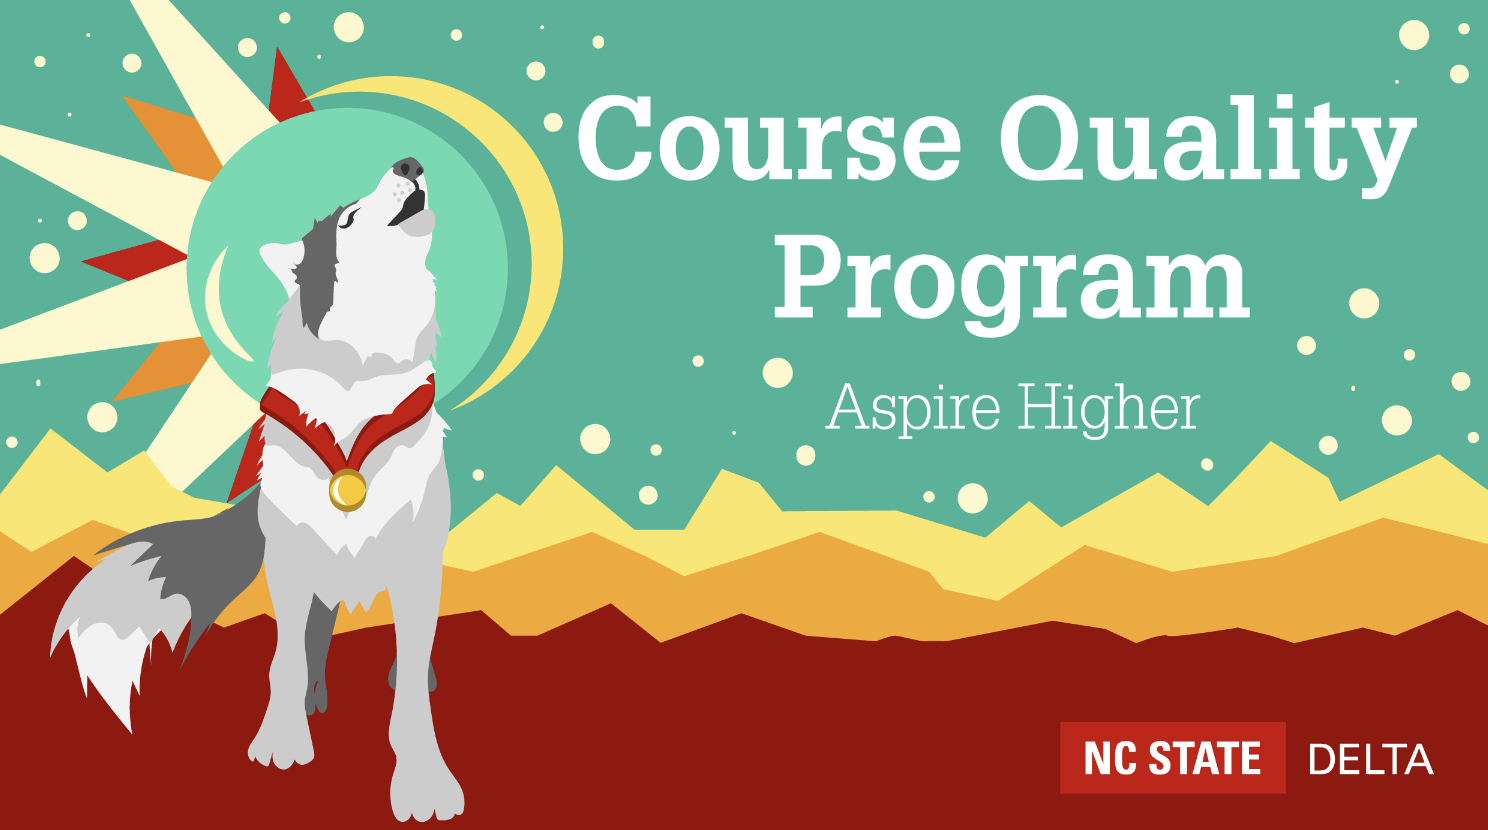 Course Quality Program at DELTA NC State University